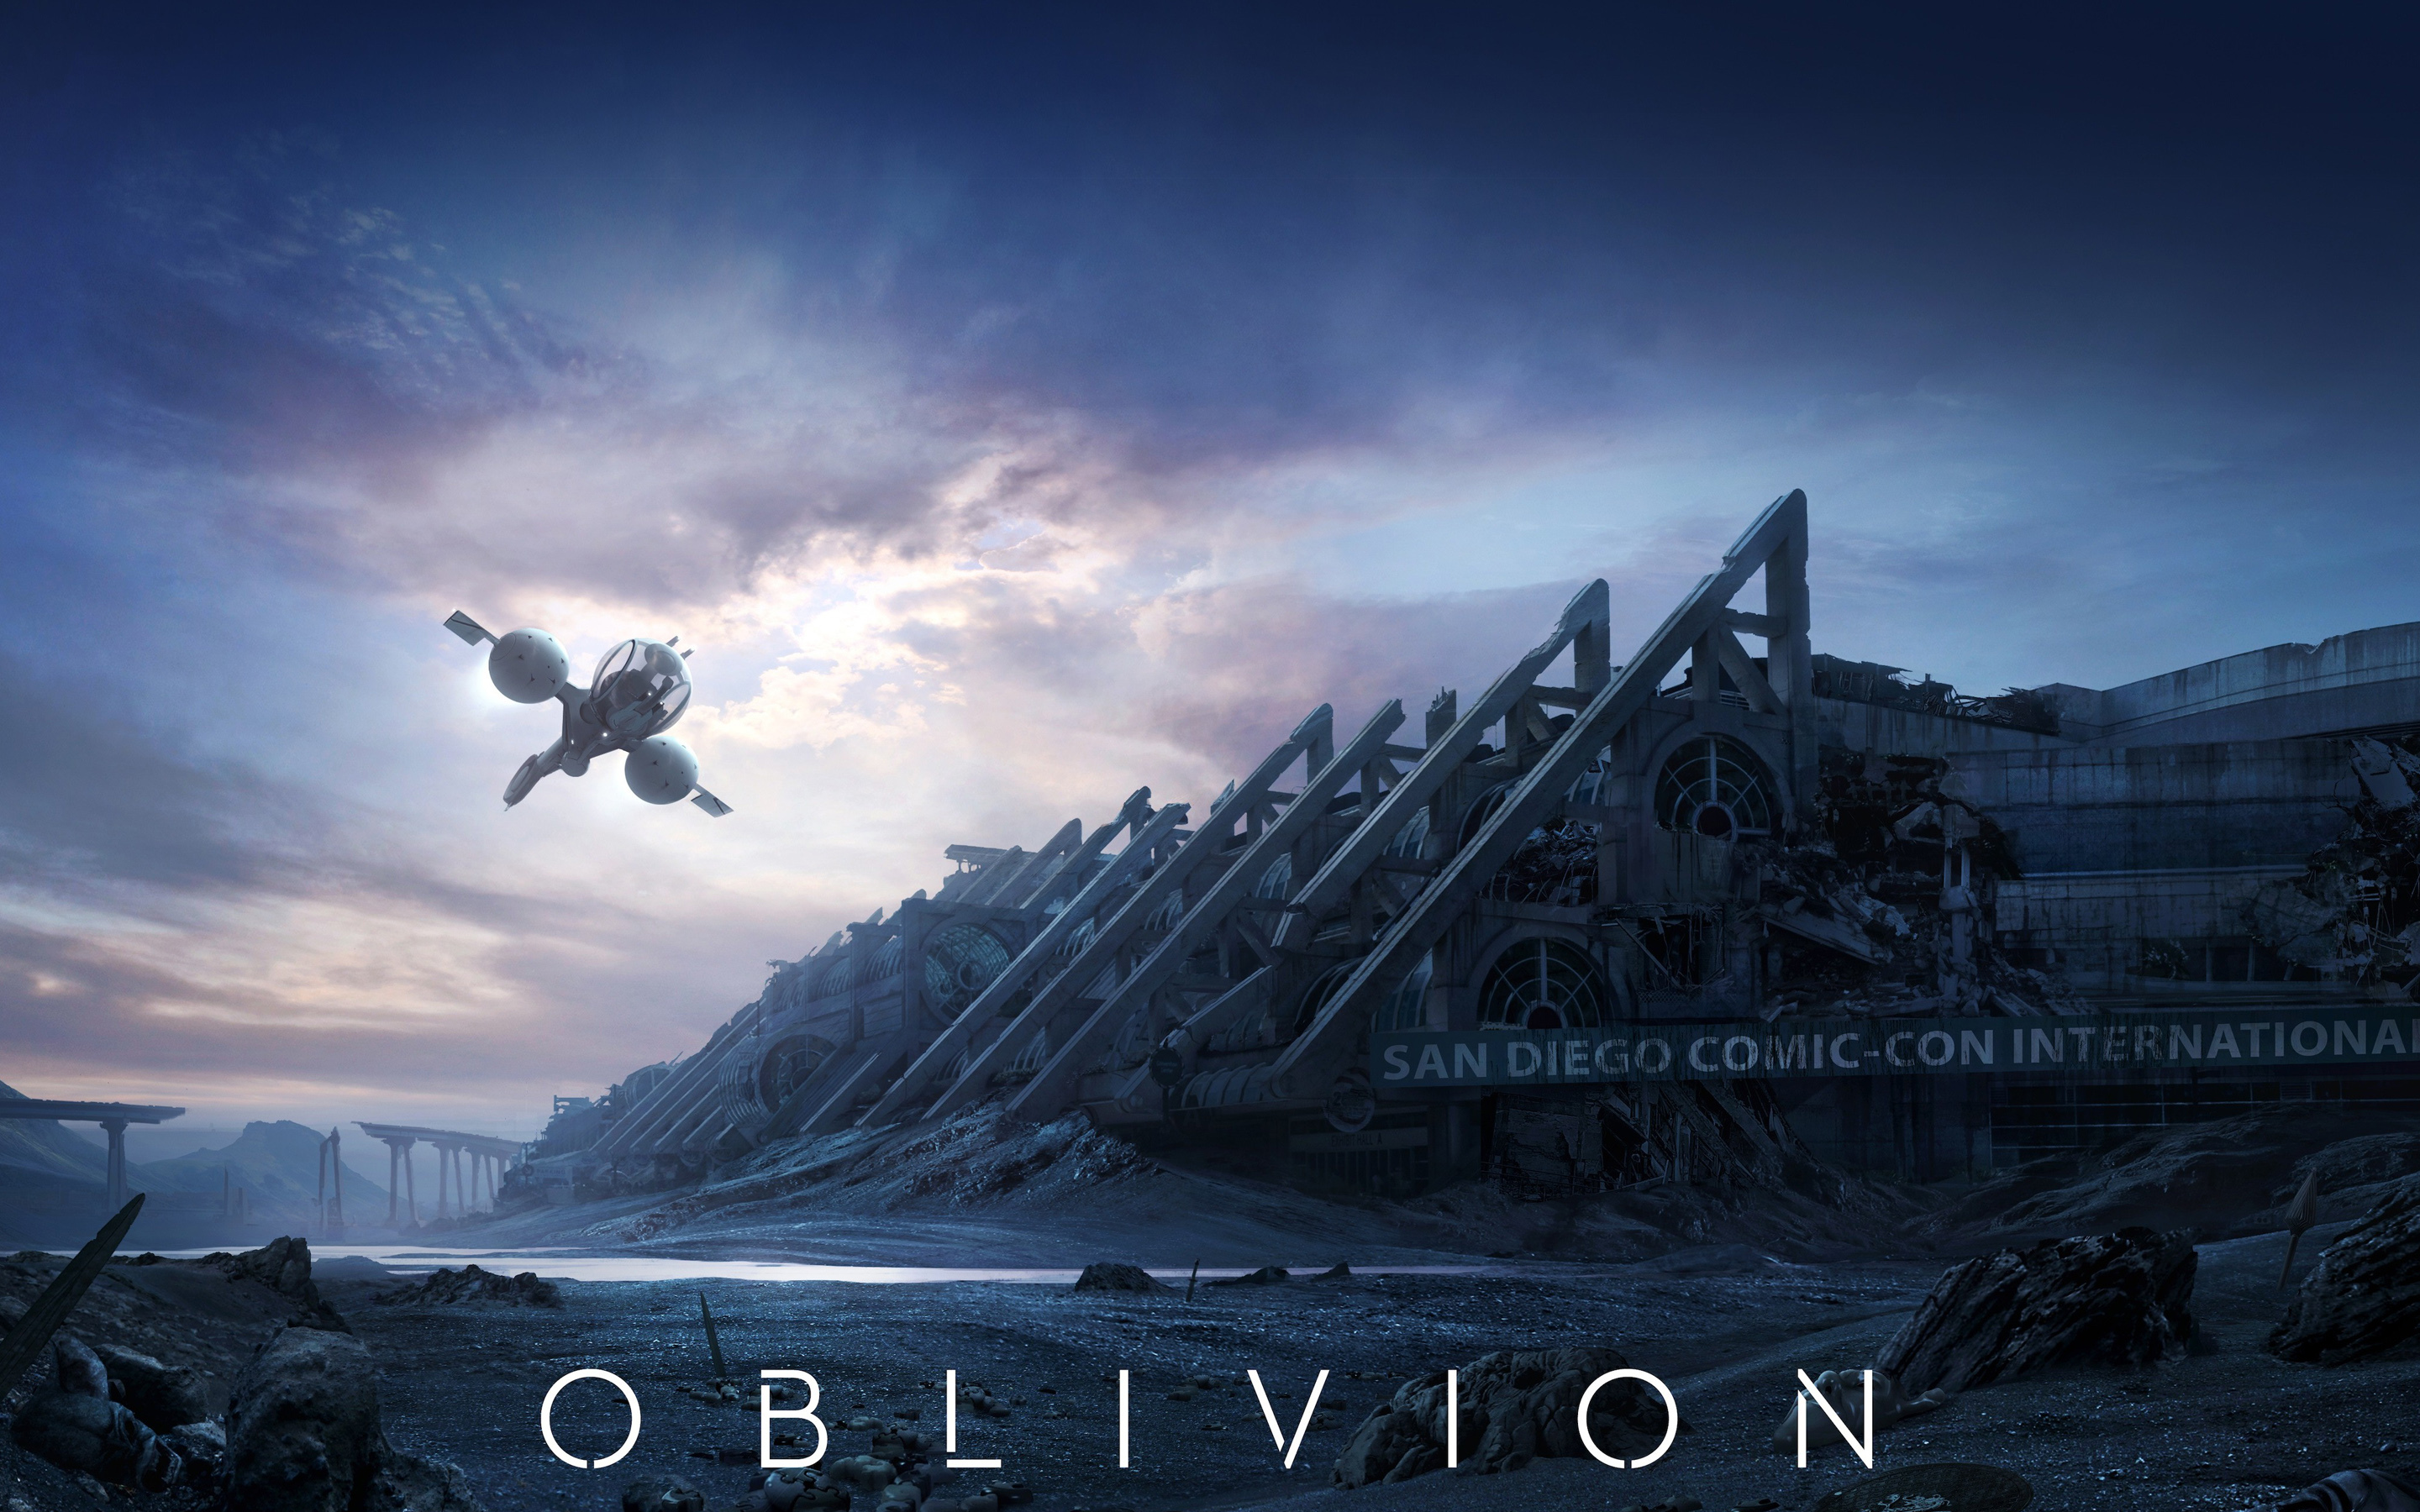 oblivion,  2013, Film , Clouds, Movies, Sci fi, Spaceship, Apocalyptic Wallpaper